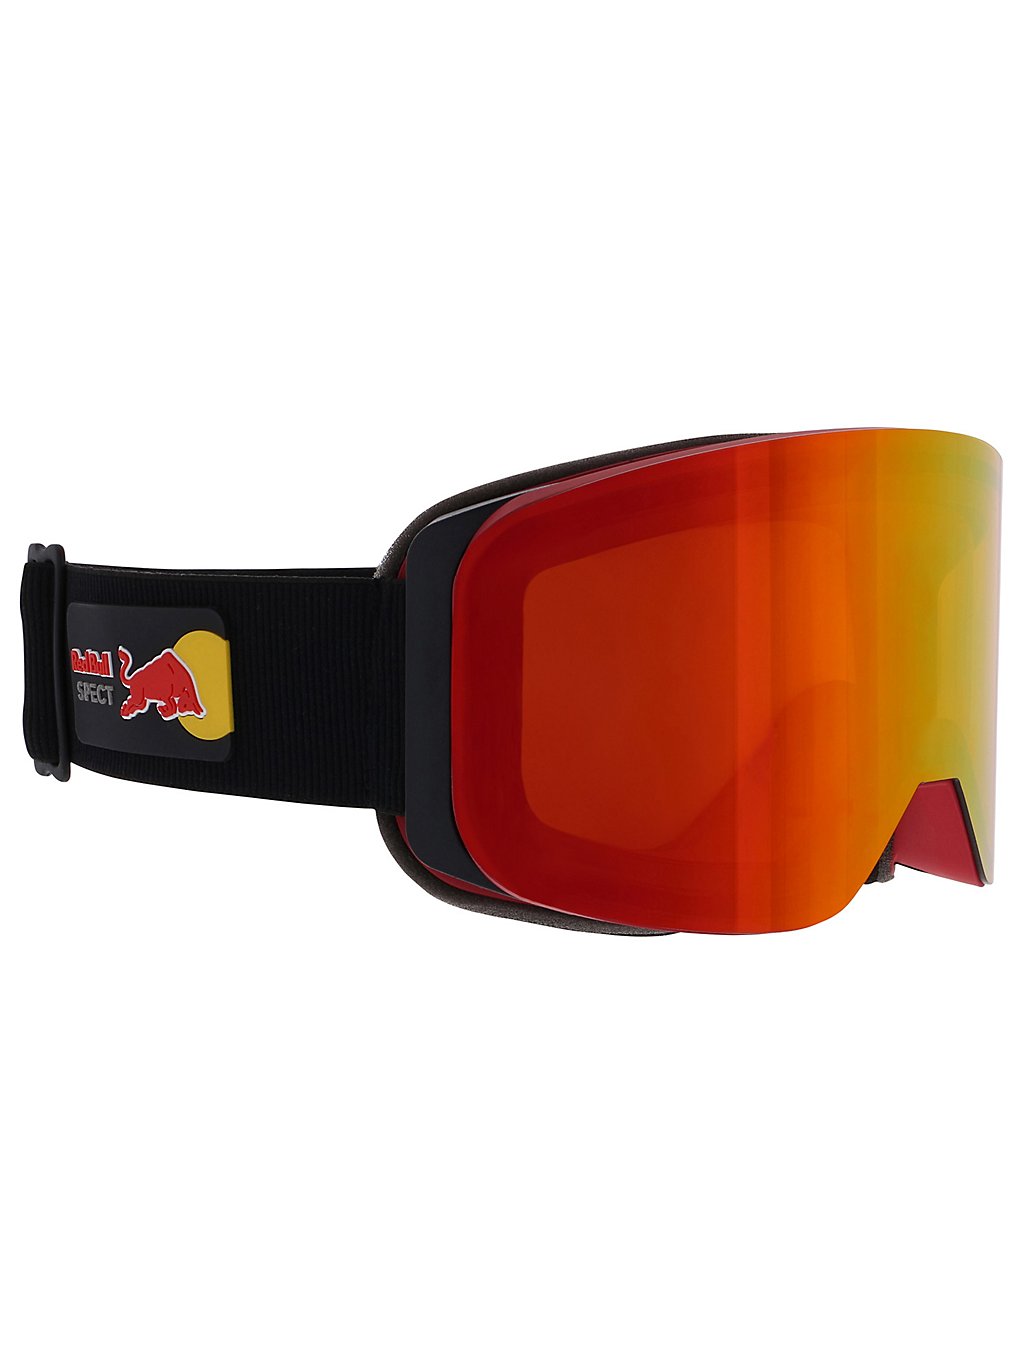 Red Bull SPECT Eyewear Magnetron Slick Red Goggle rd mr cat s2